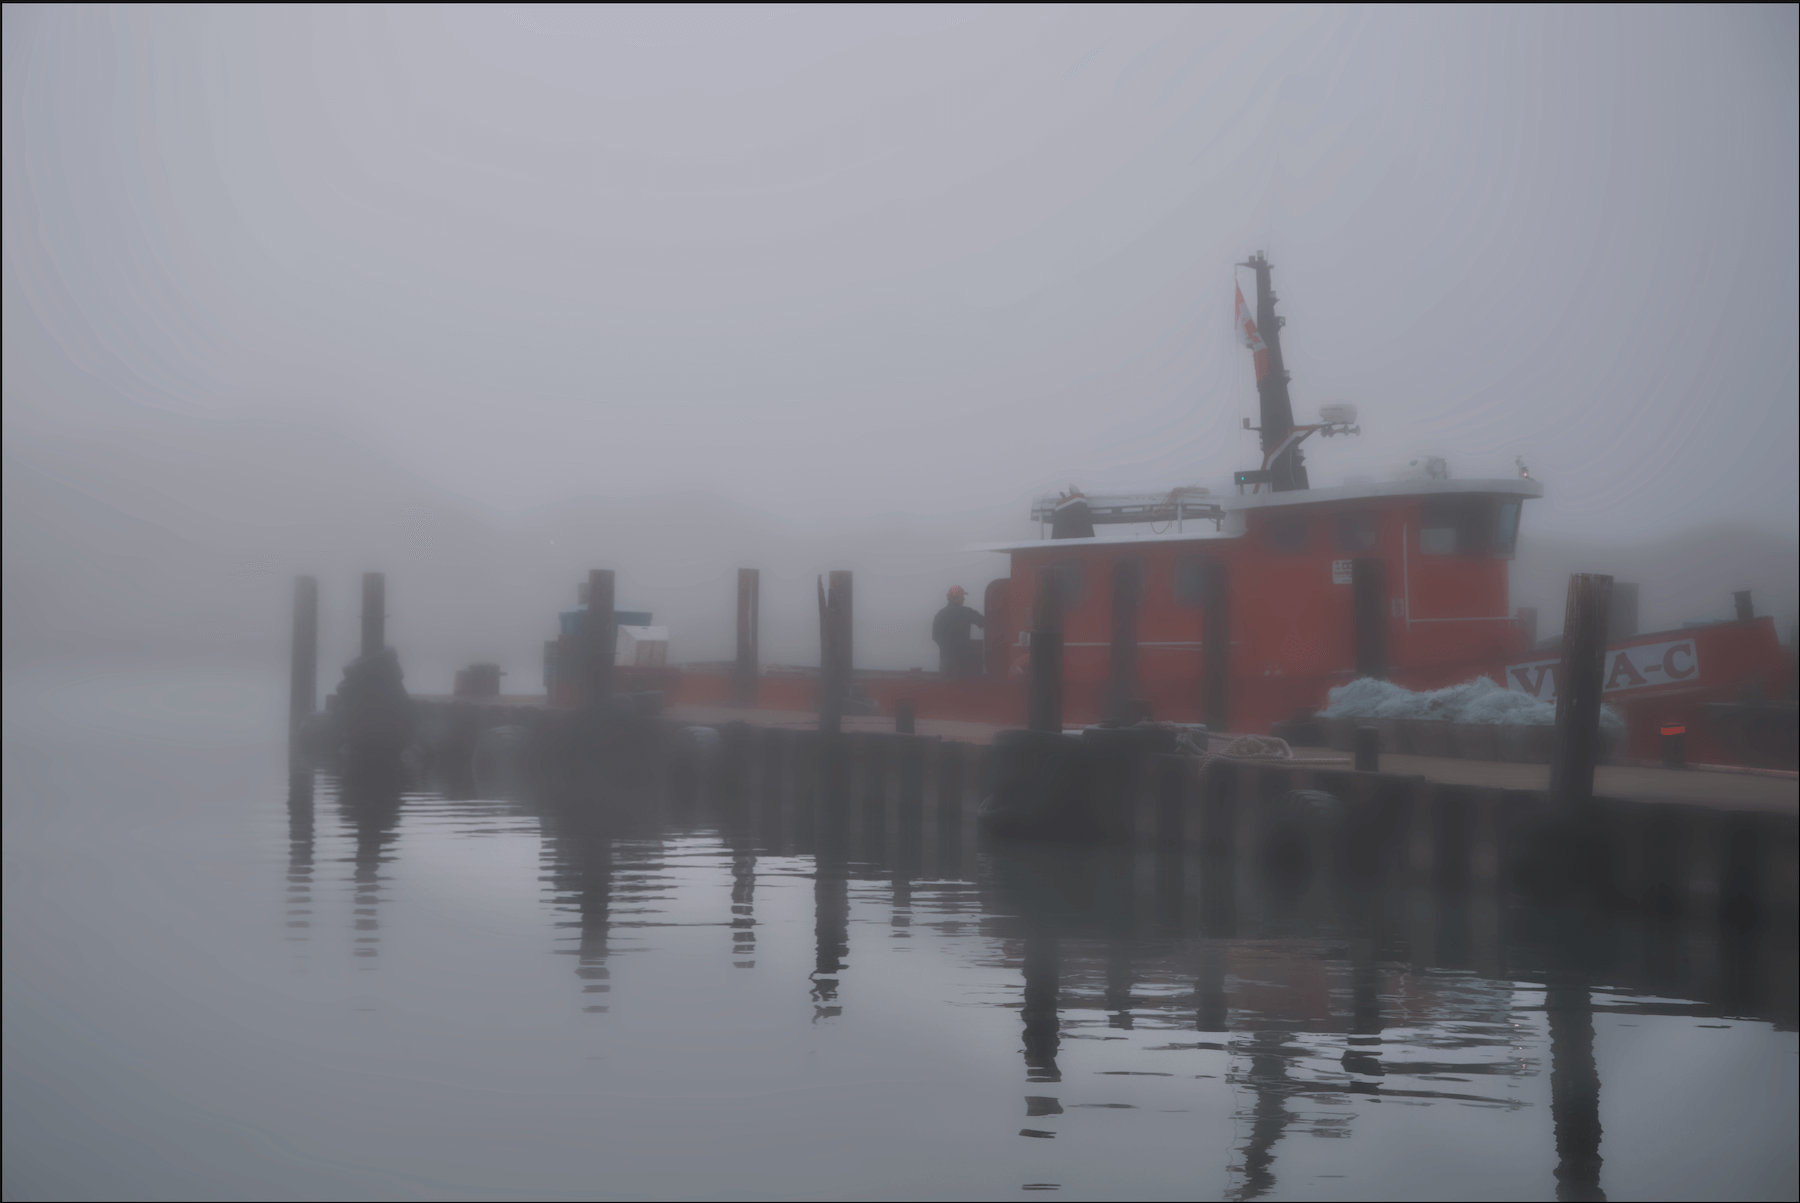 A local area tug boat prepares for it's daily routine. I liked the shot mostly for the reflection in the water which was so divergent from the surrounding fog.